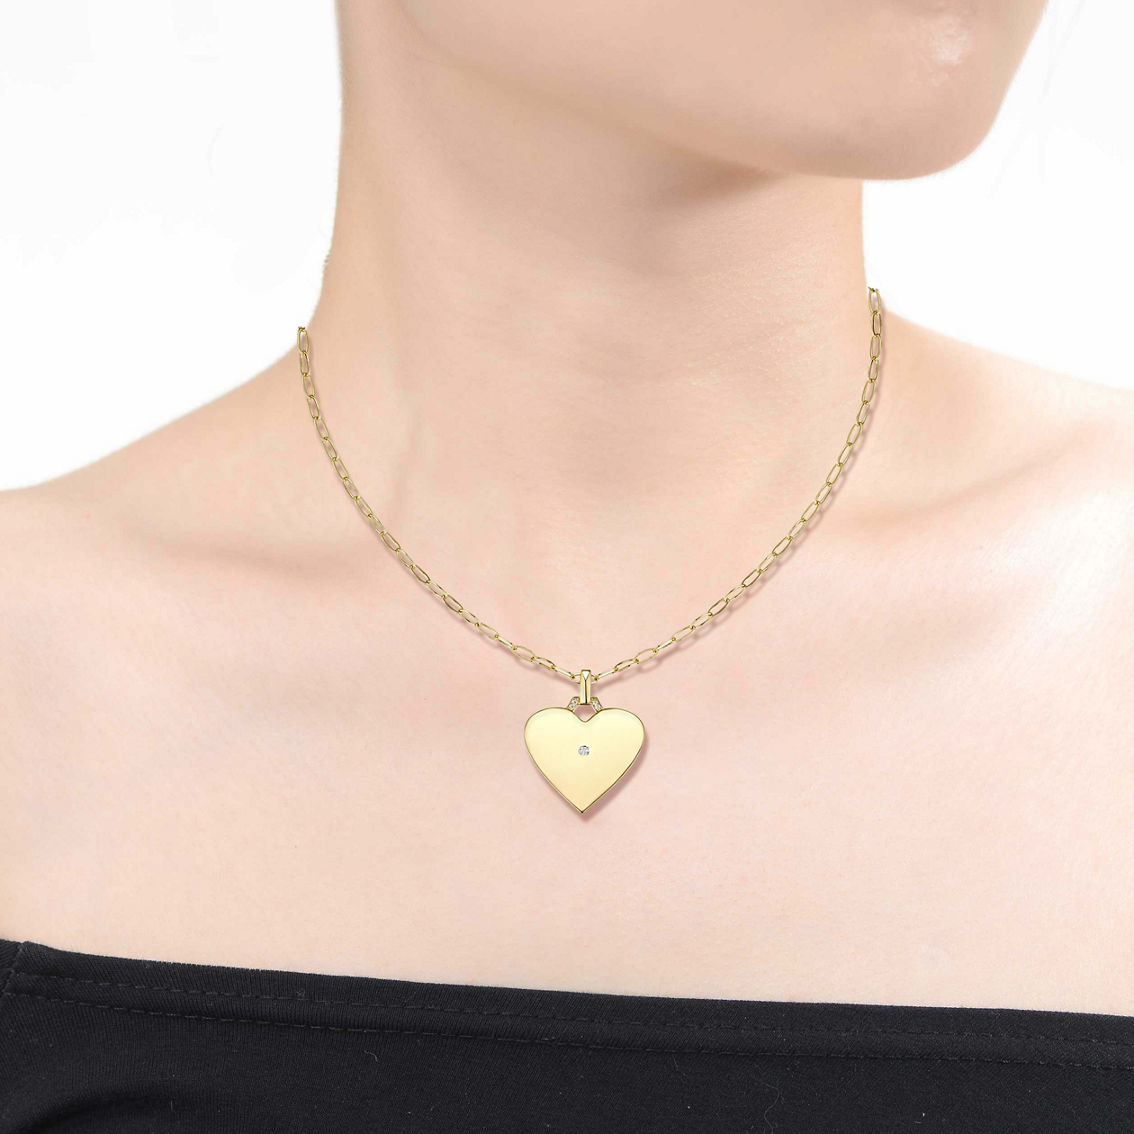 Kids 14k Gold Plated with Cubic Zirconia Heart Pendant Necklace - Image 2 of 2